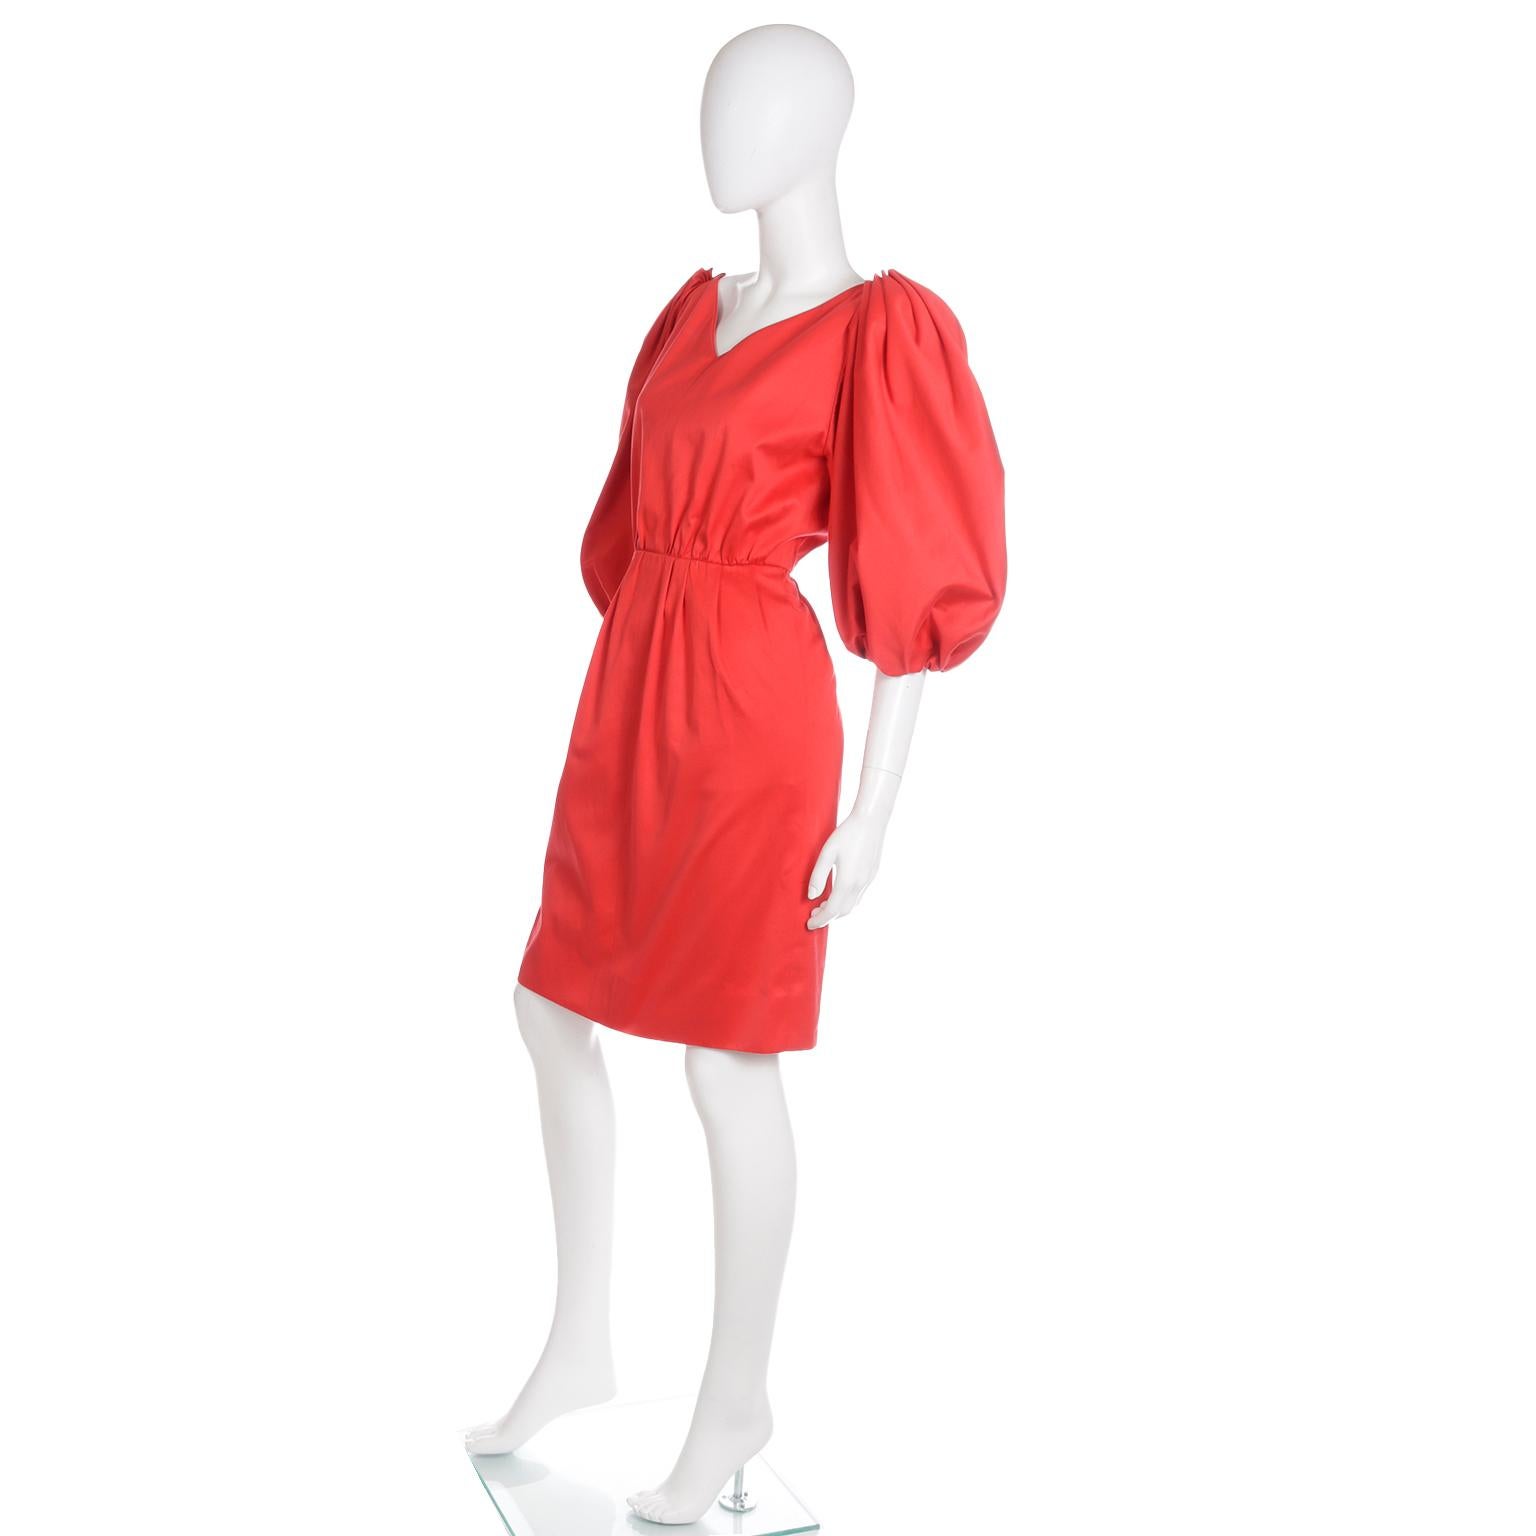 Yves Saint Laurent 1989 Vintage Red Runway Dress with Puff Statement Sleeves 5